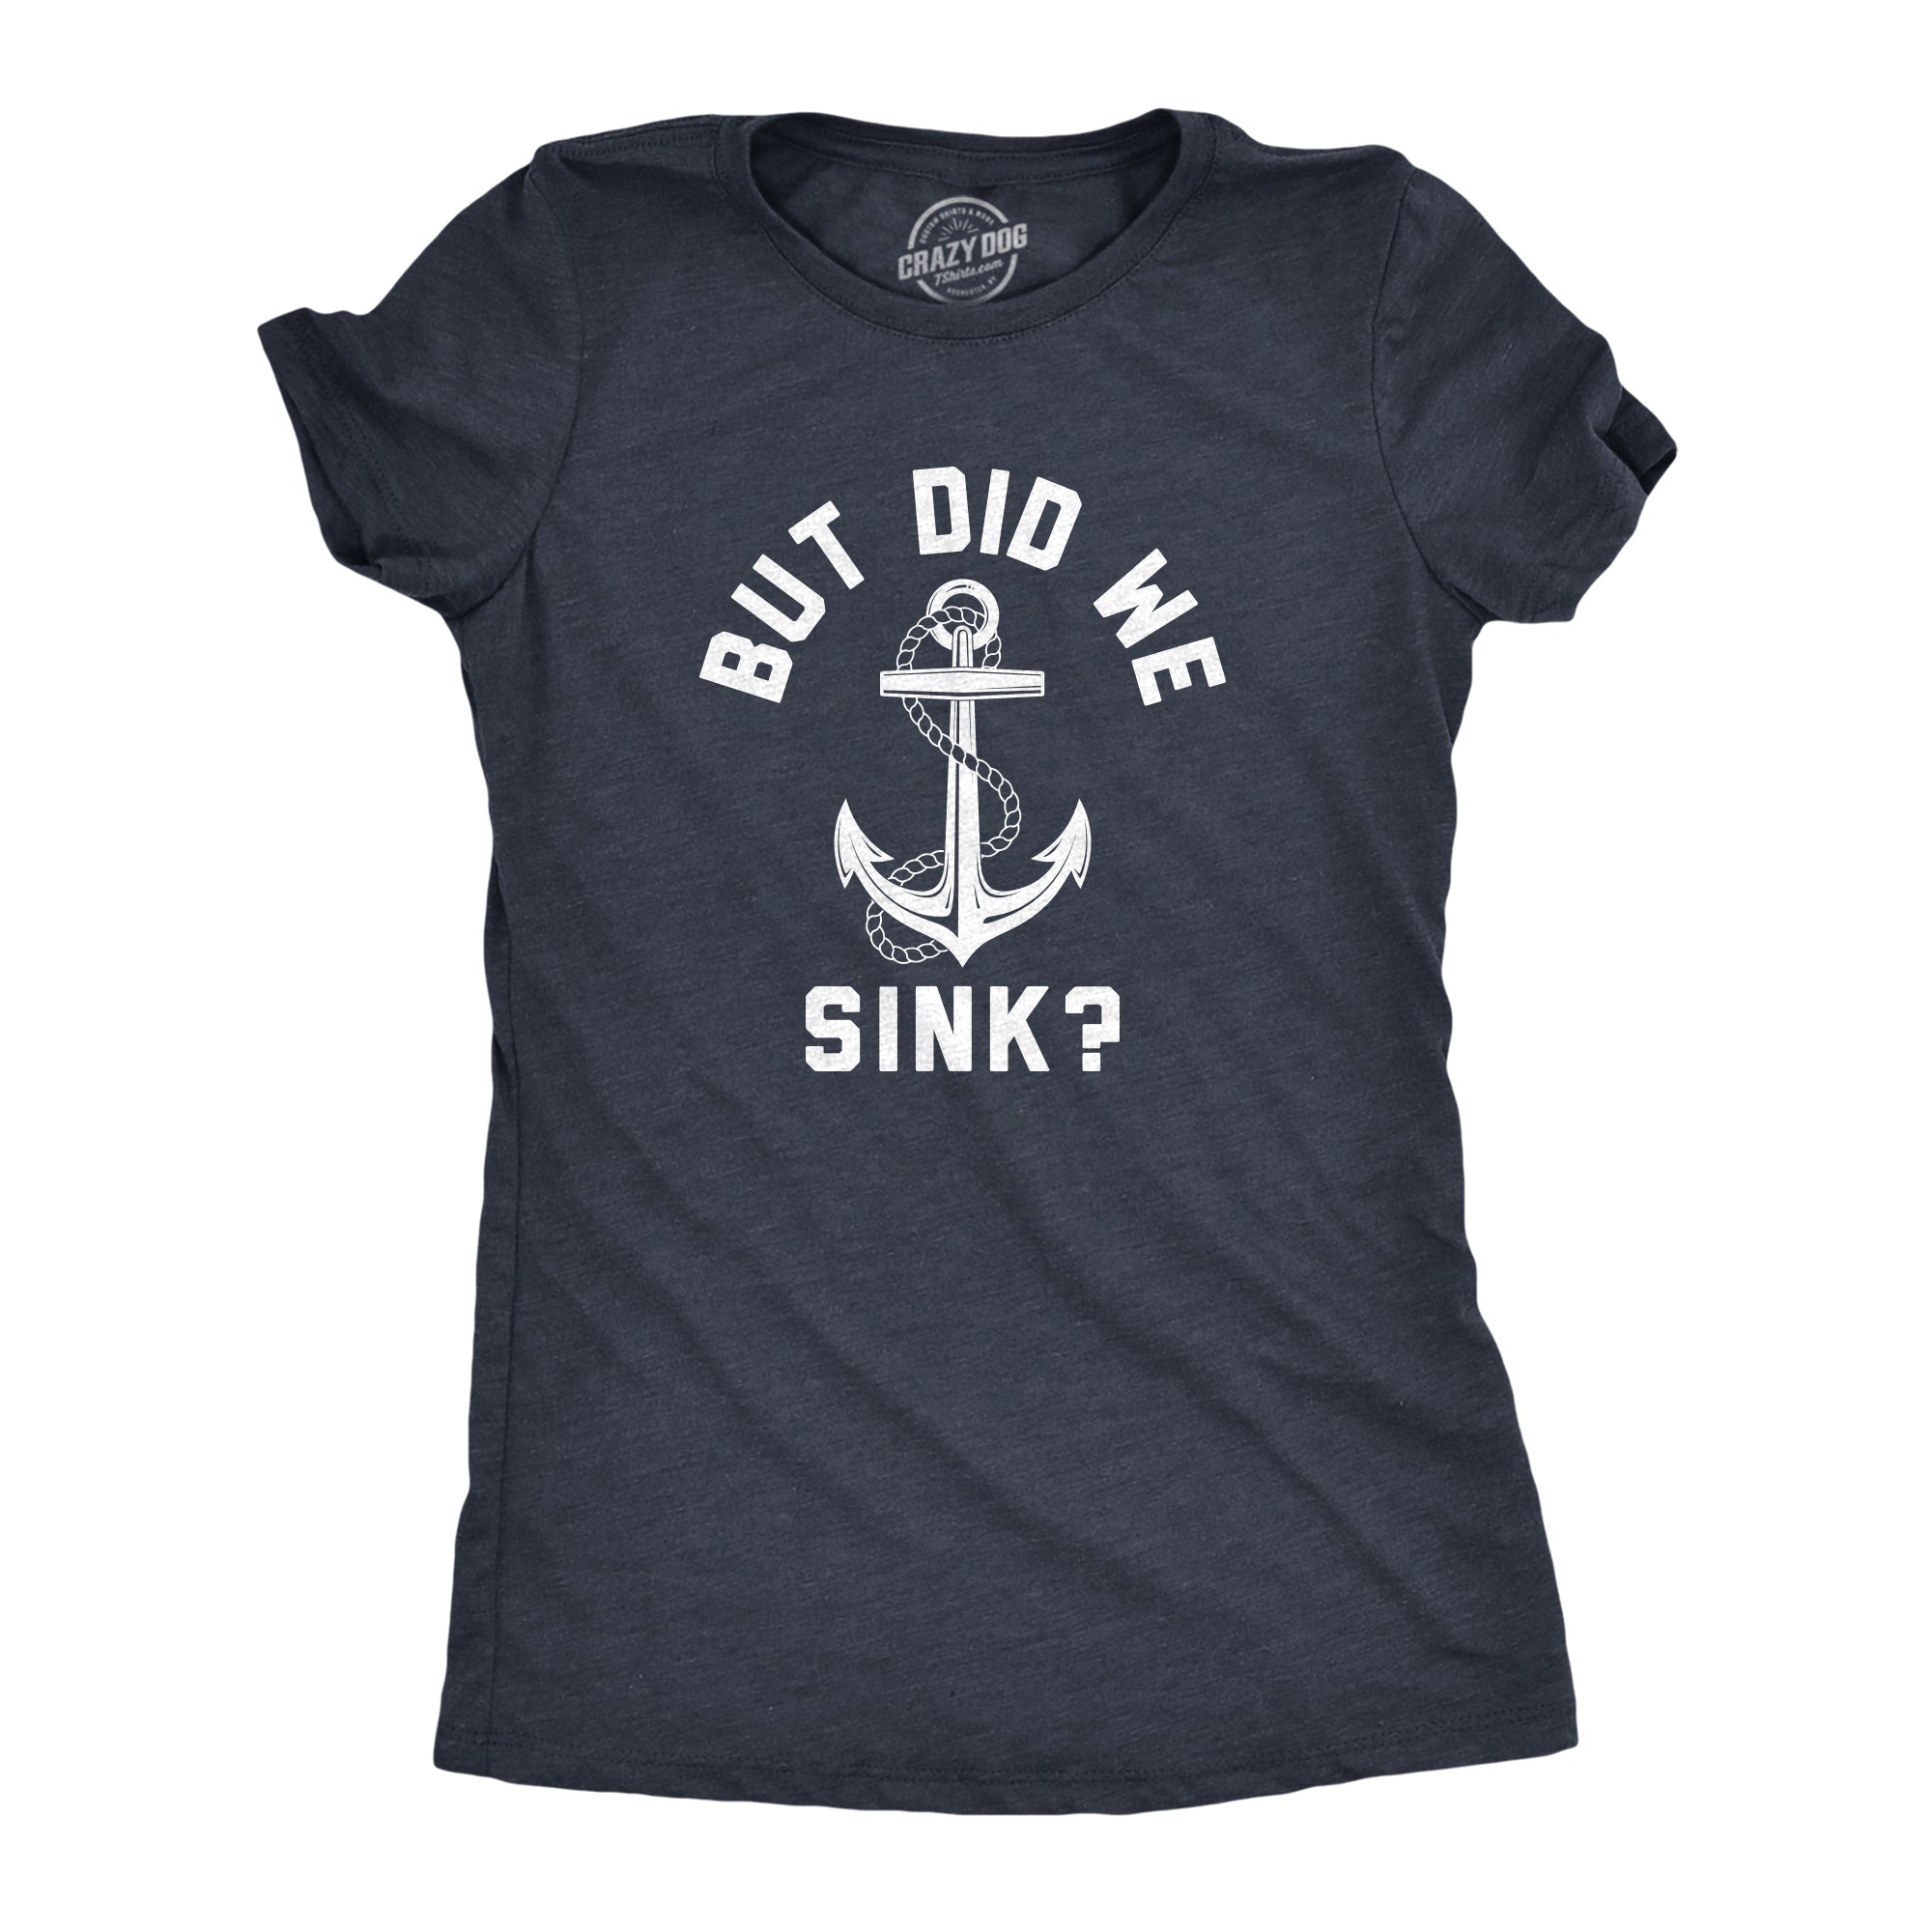 Funny Heather Navy - SINK But Did We Sink Womens T Shirt Nerdy sarcastic Tee